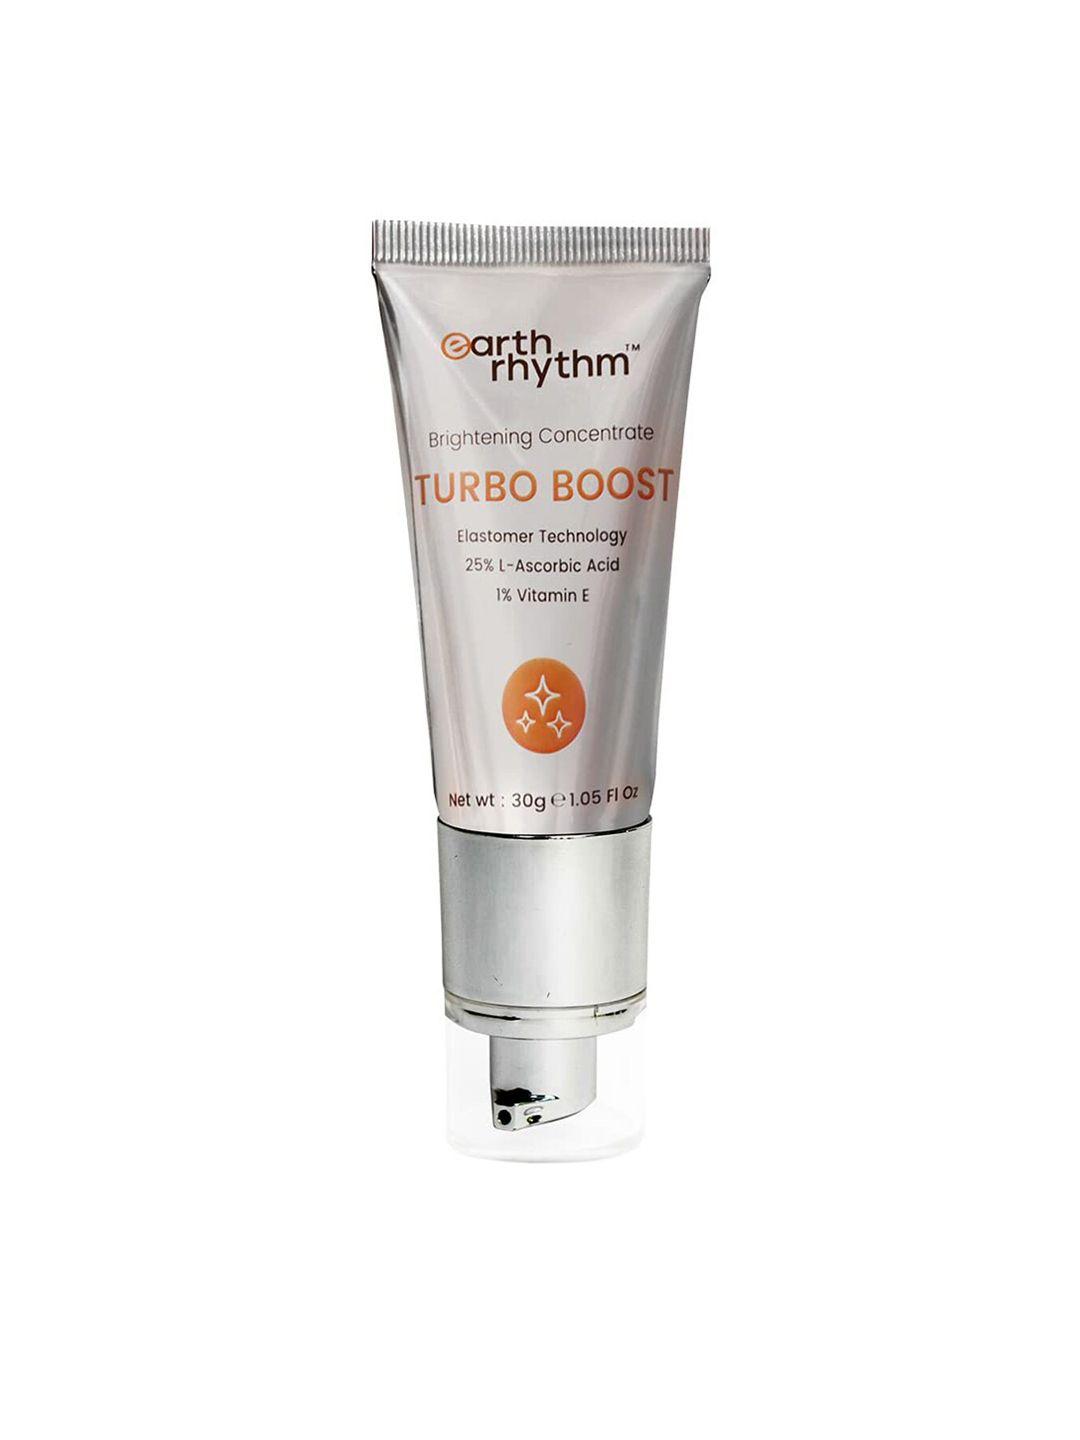 earth rhythm turbo boost brightening face concentrate cream with l-ascorbic acid - 30 g